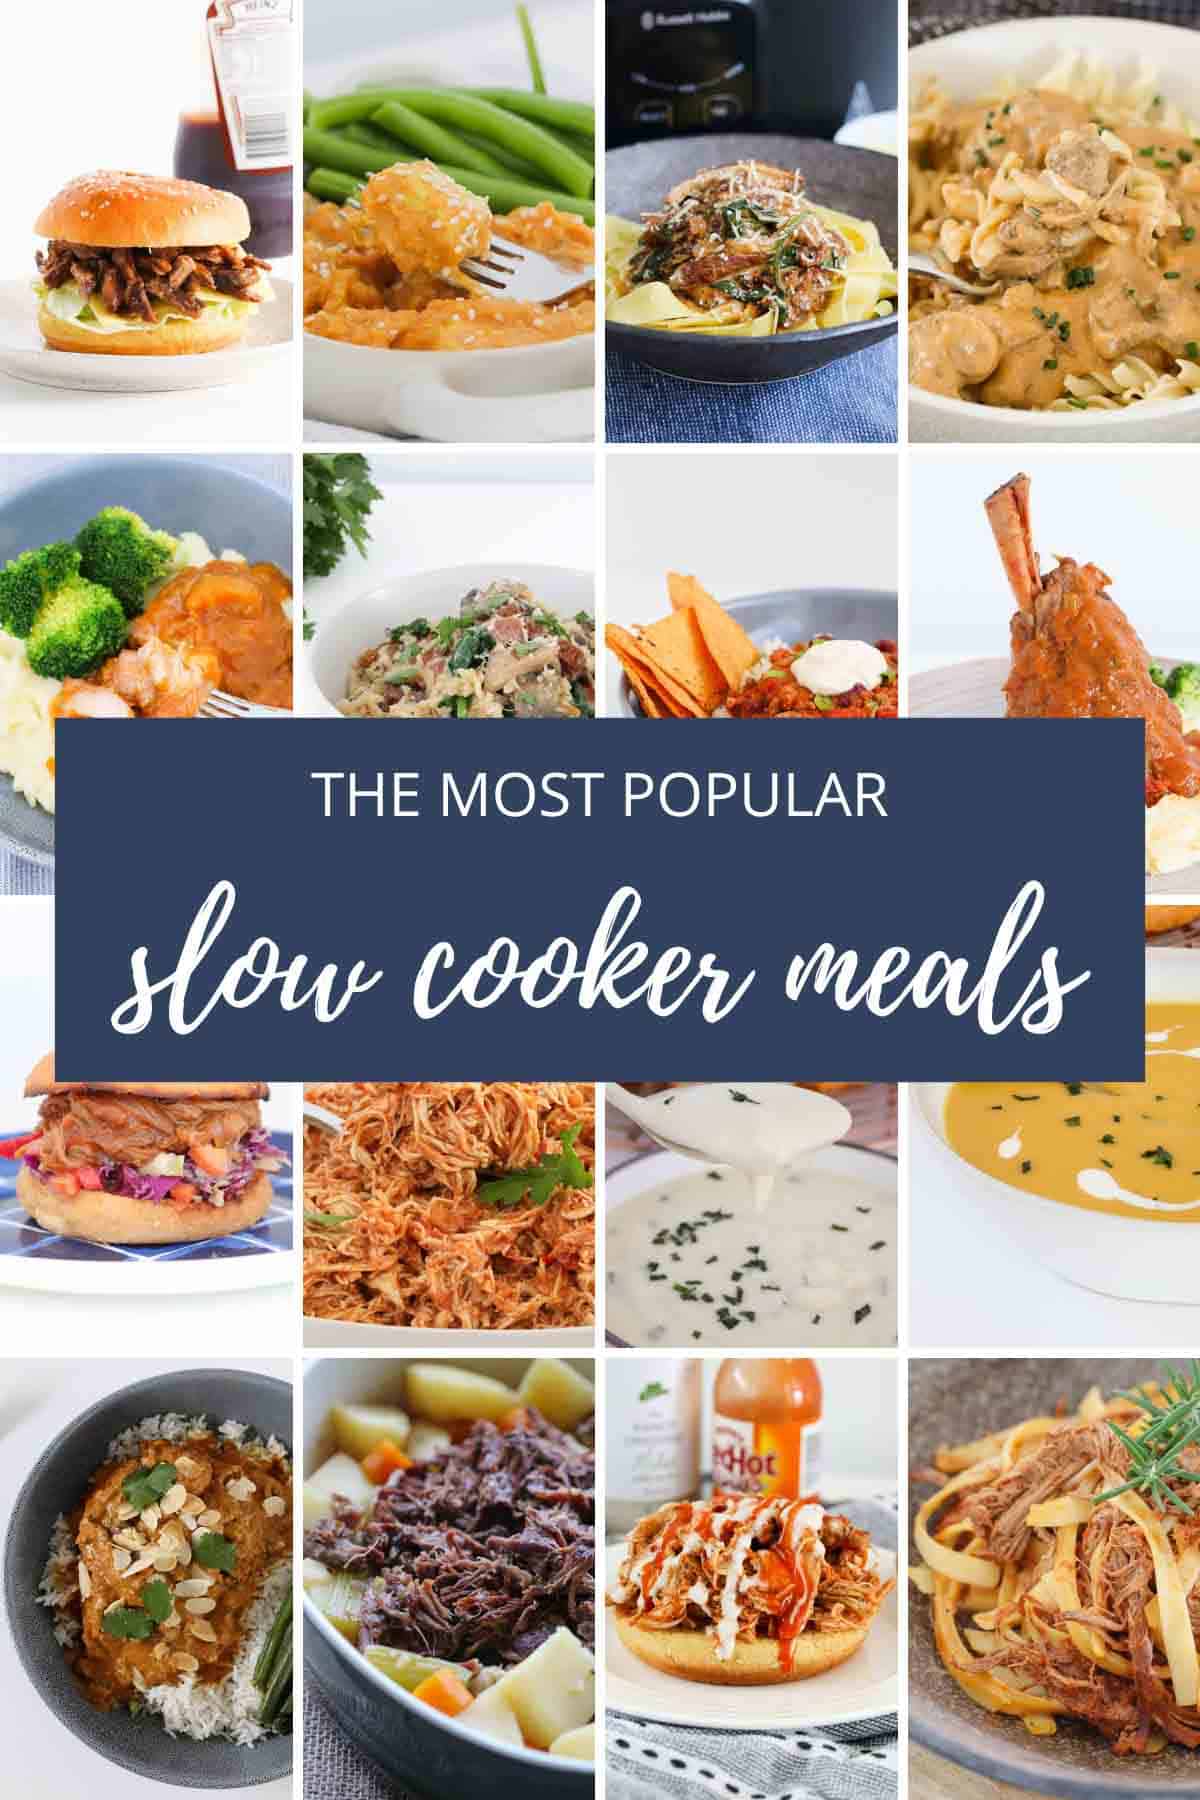 A collage of recipes made in a slow cooker or crock pot.